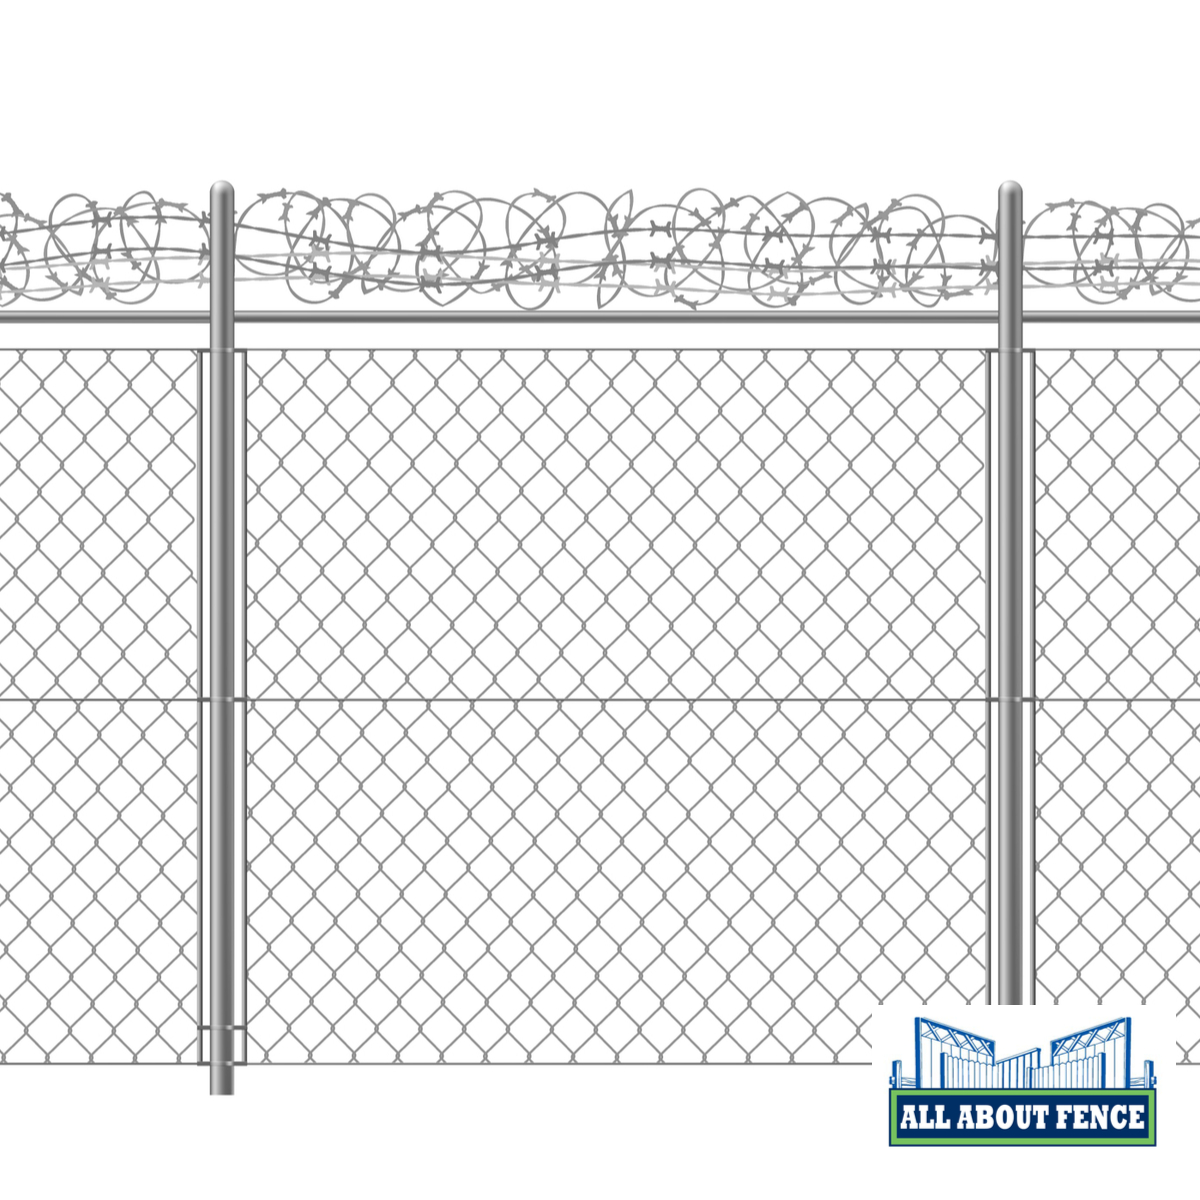 Talk With Us About Your Security Fencing Options In Mercer Island